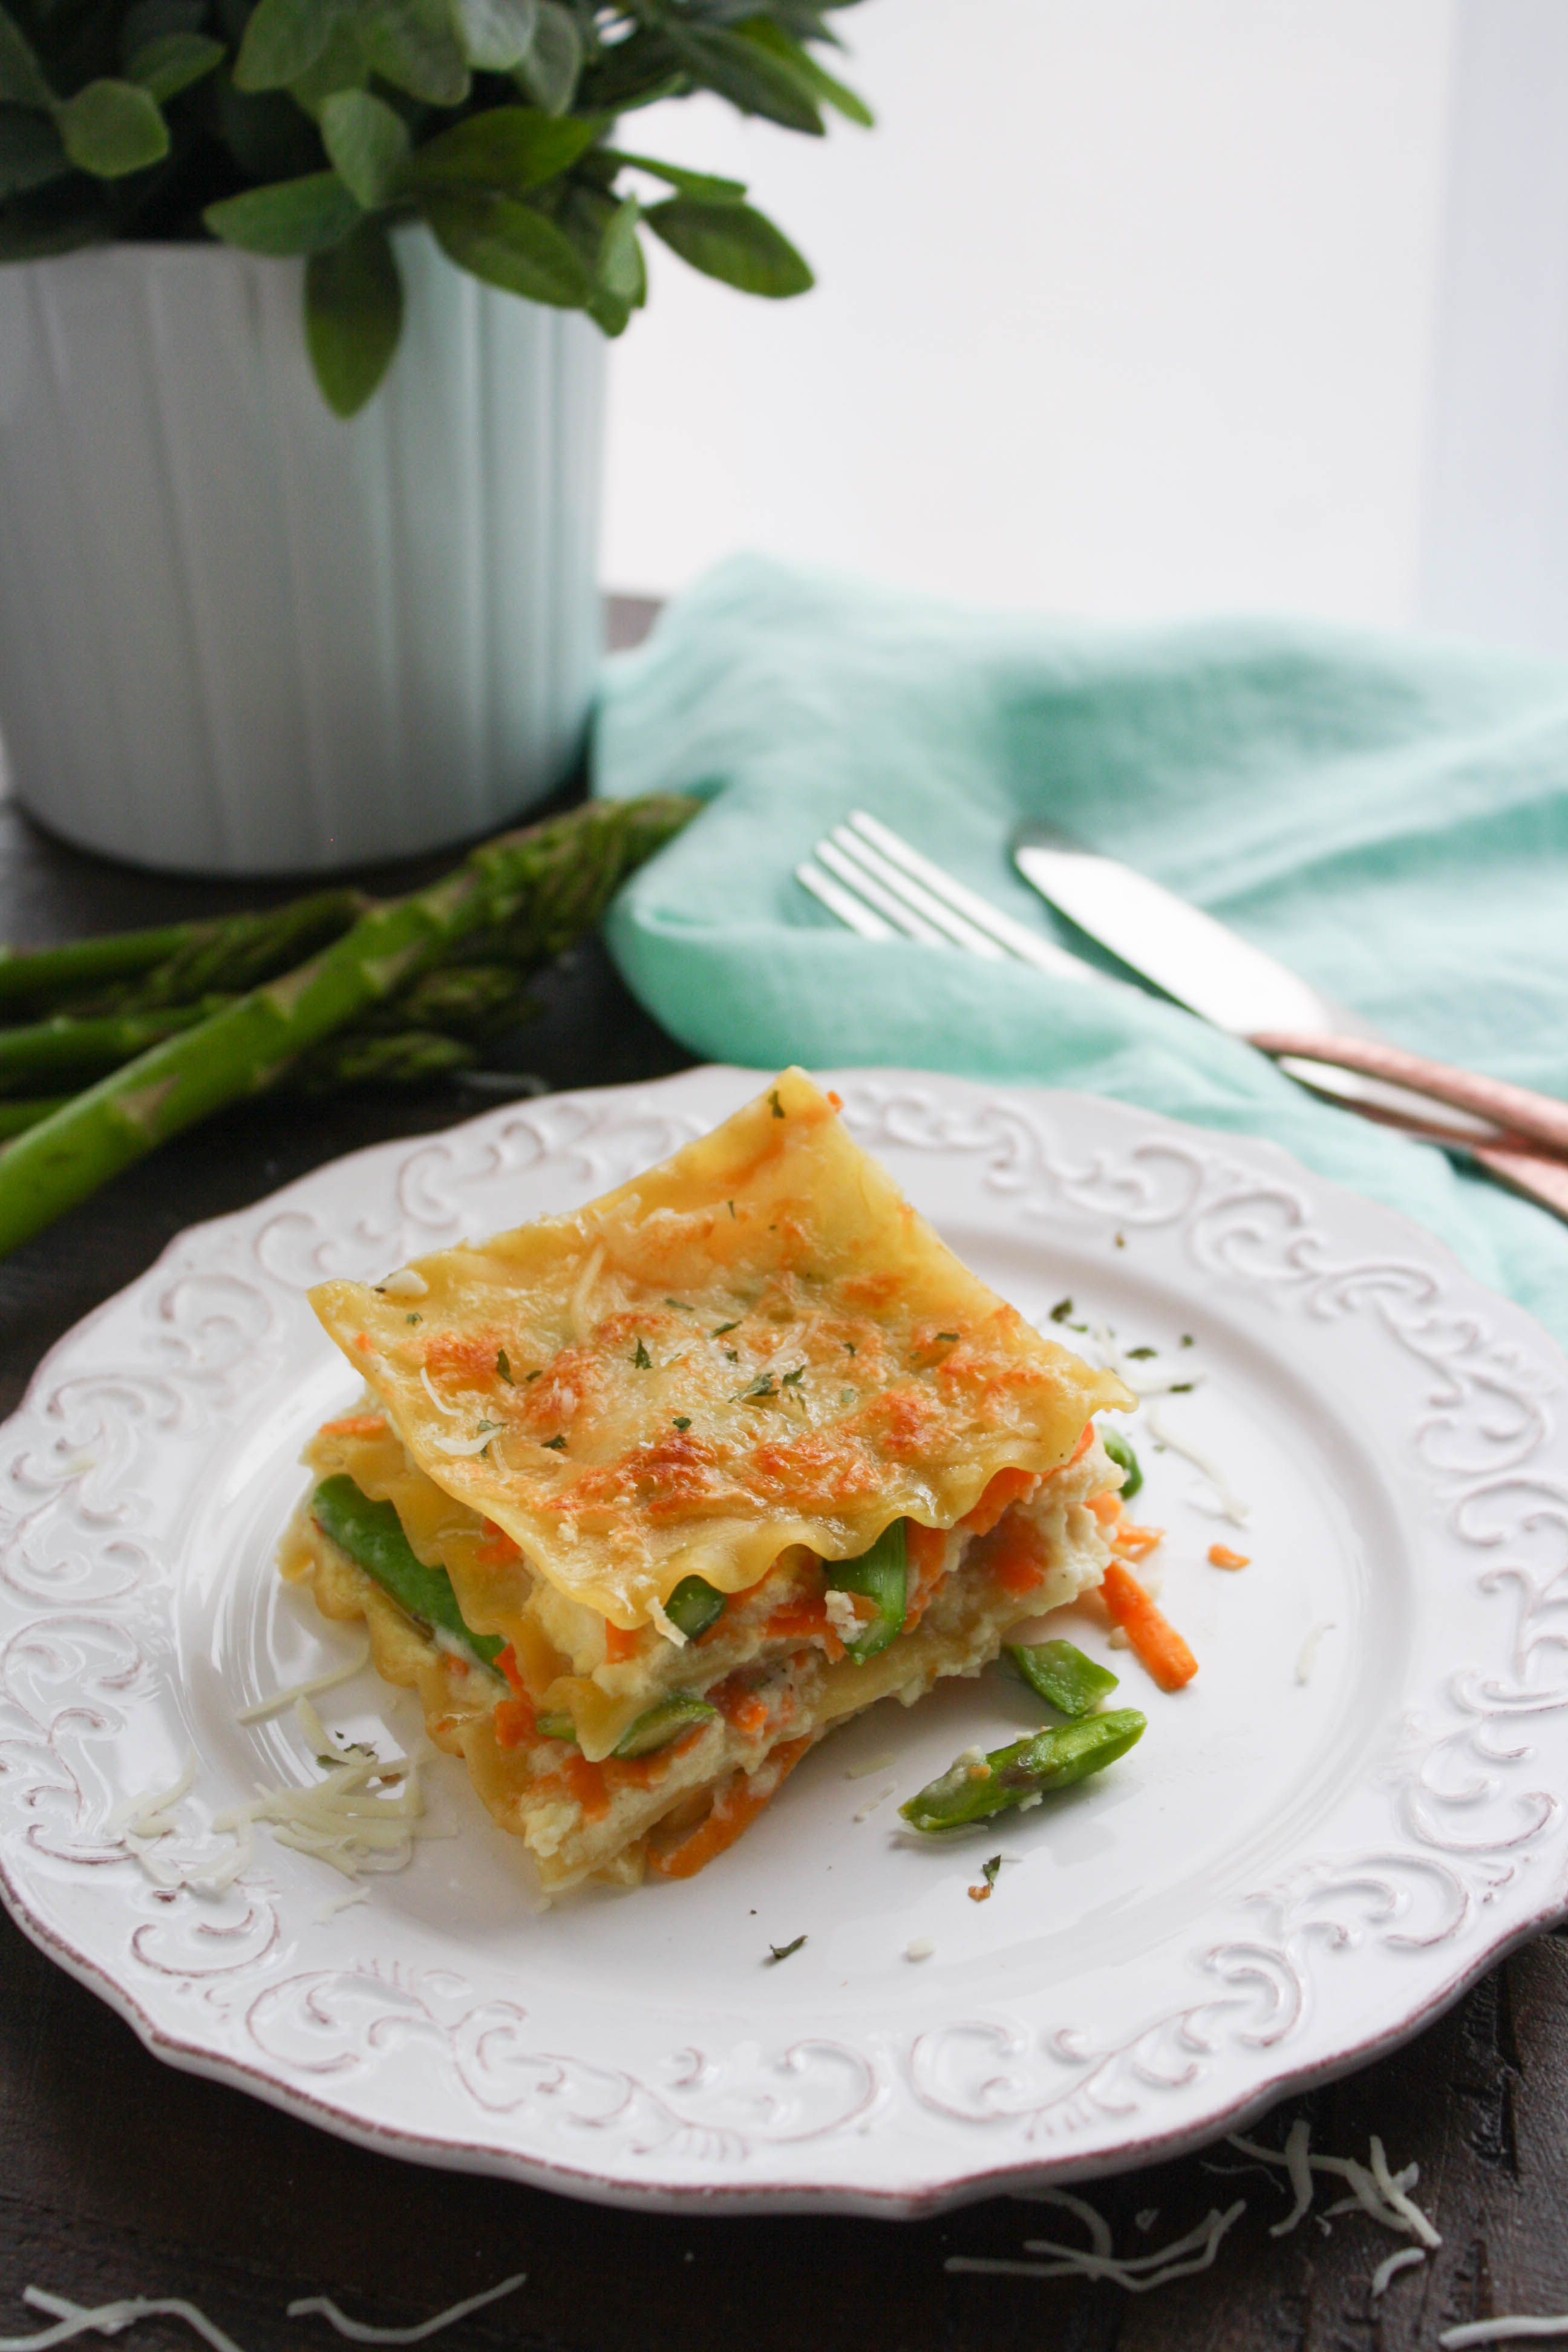 Asparagus and Sweet Potato Lasagna is perfect for a meal this spring. You'll love serving Asparagus and Sweet Potato Lasagna!